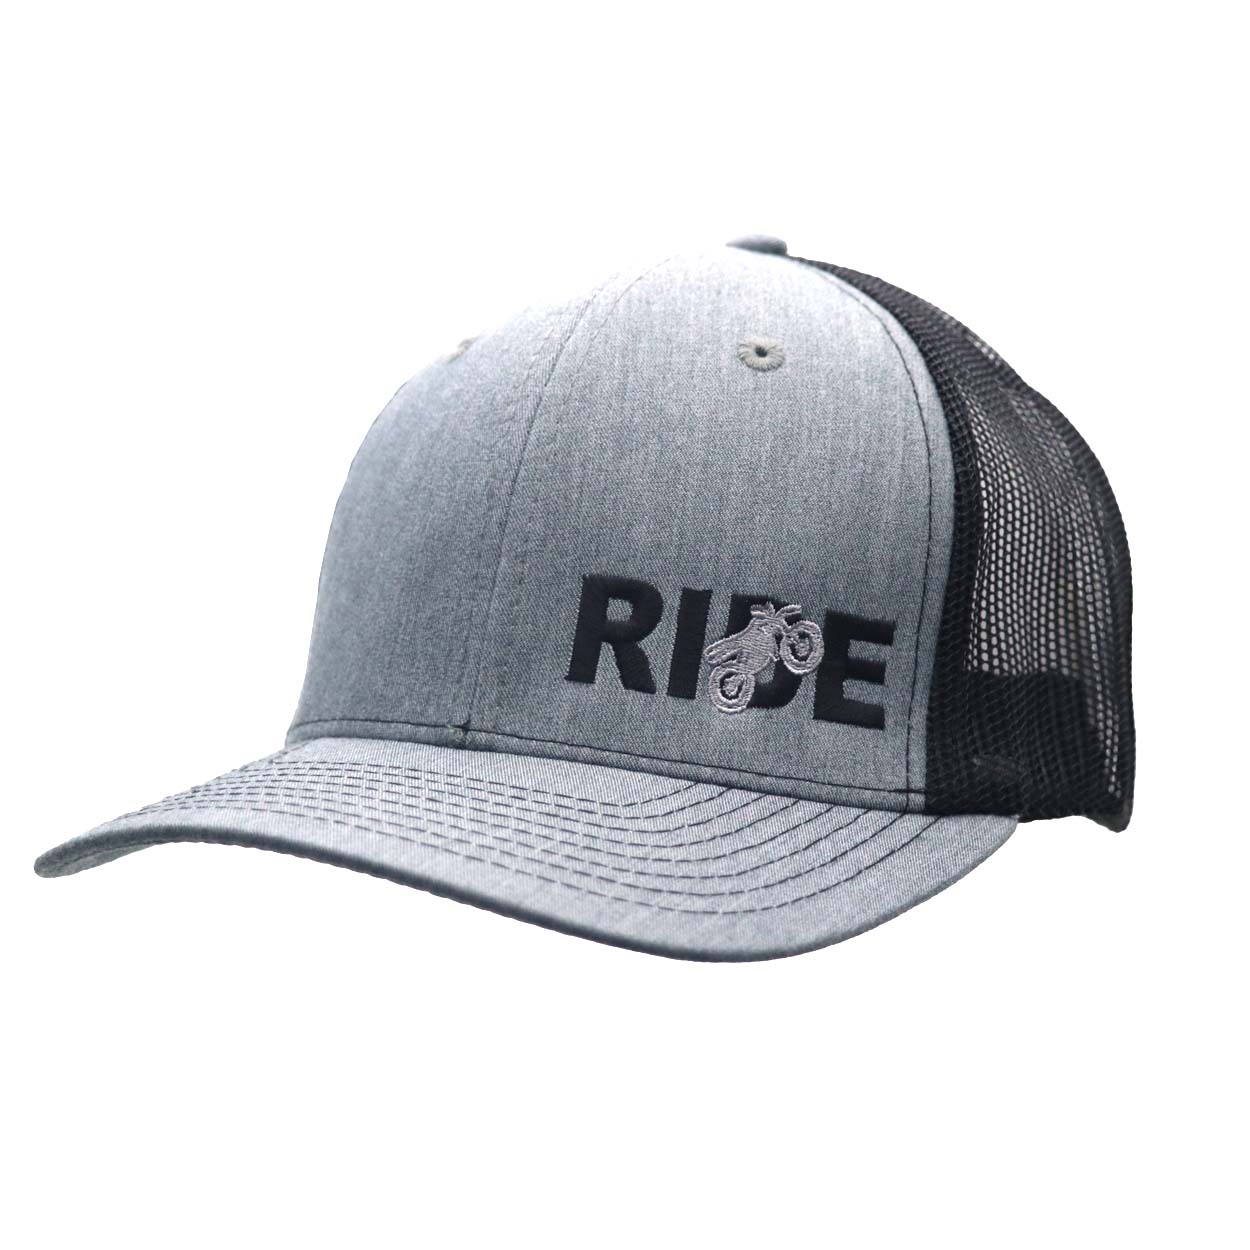 Ride Moto Logo Night Out Embroidered Snapback Trucker Hat Heather Gray/Black